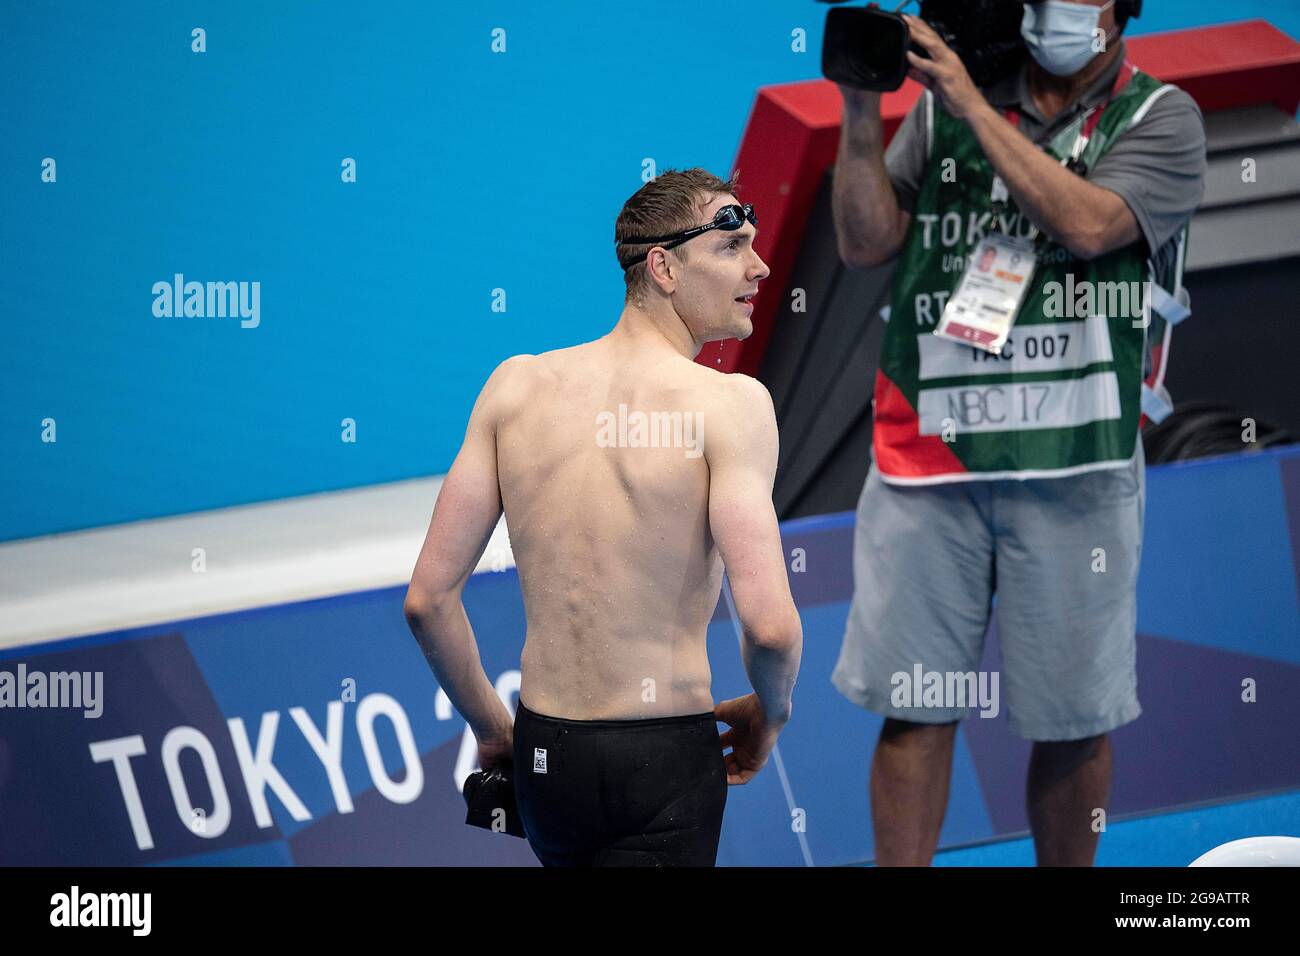 Henning Bennett MUEHLLEITNER (Muhlleitner, GER), 4° posto, deluso; Freestyle, 400m uomini, finale; Nuoto il 07/25/2021; Olimpiadi estive 2020, dal 23.07. - 08.08.2021 a Tokyo / Giappone. Foto Stock